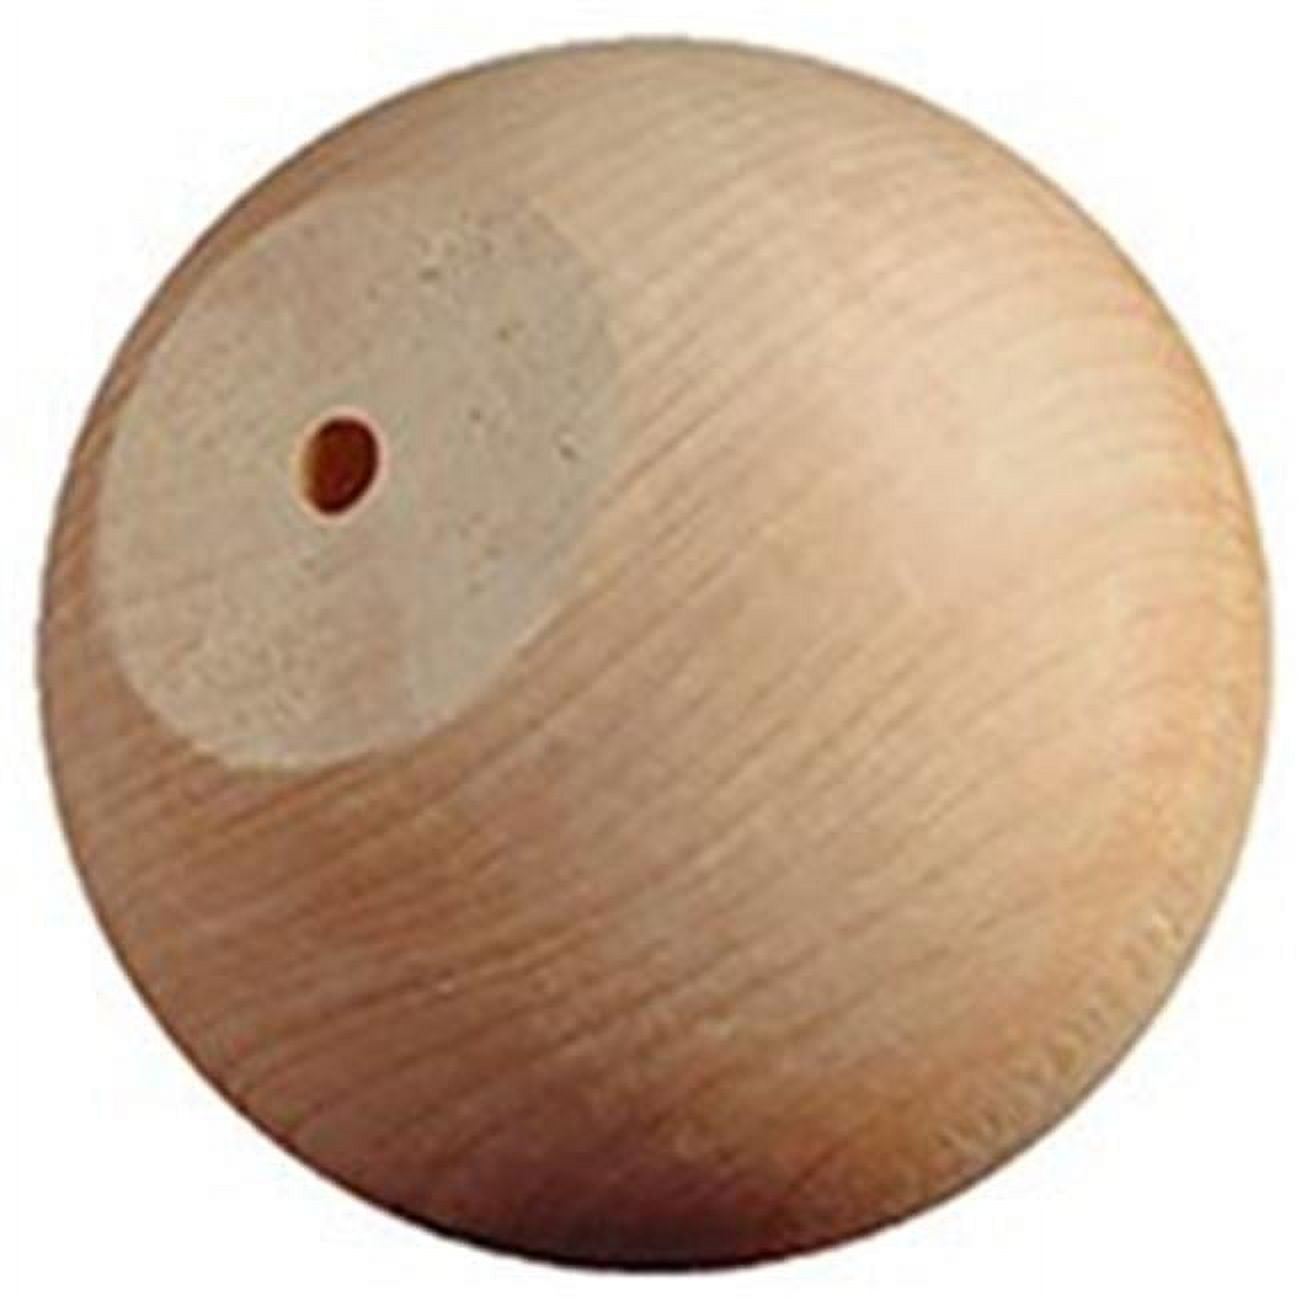 F-kb-150 1.5 In. Round Wood Knob - Pack Of 2